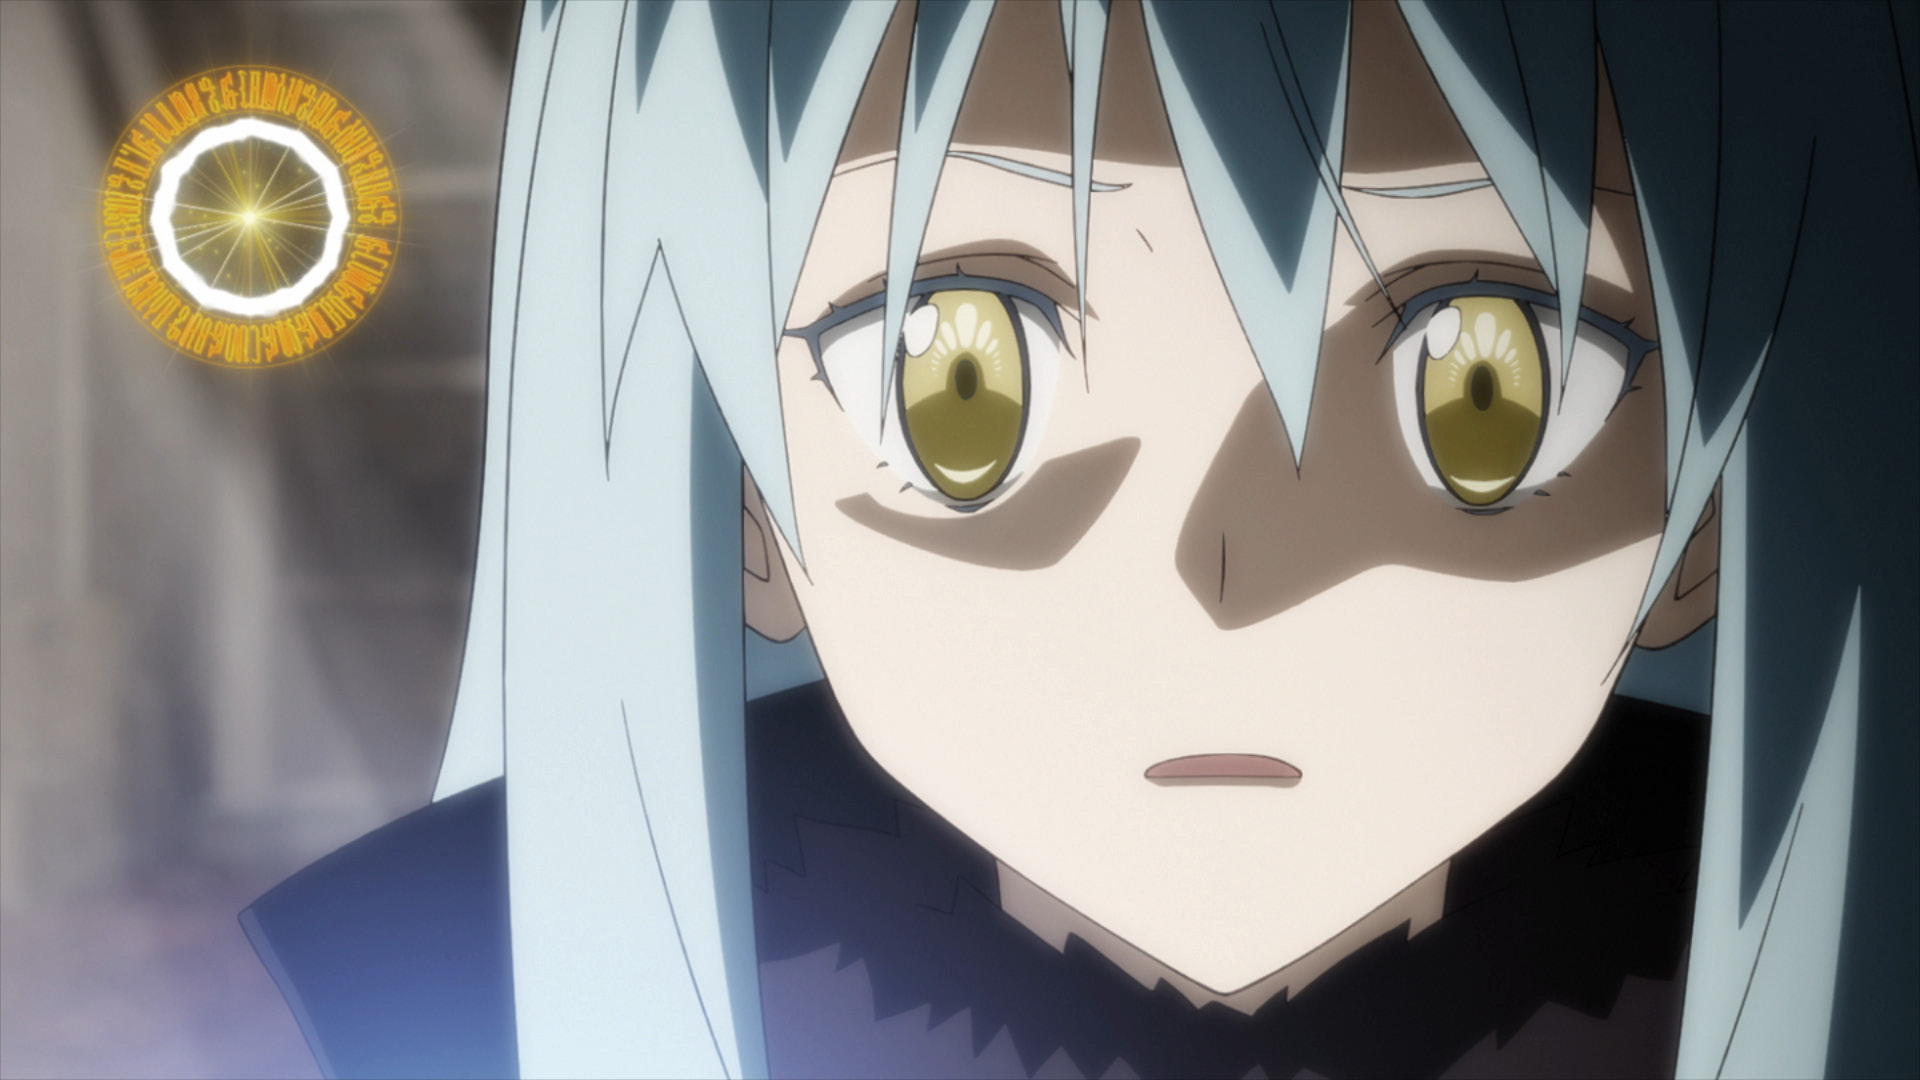 That Time I Got Reincarnated as a Slime: Scarlet Bond Release Date Set